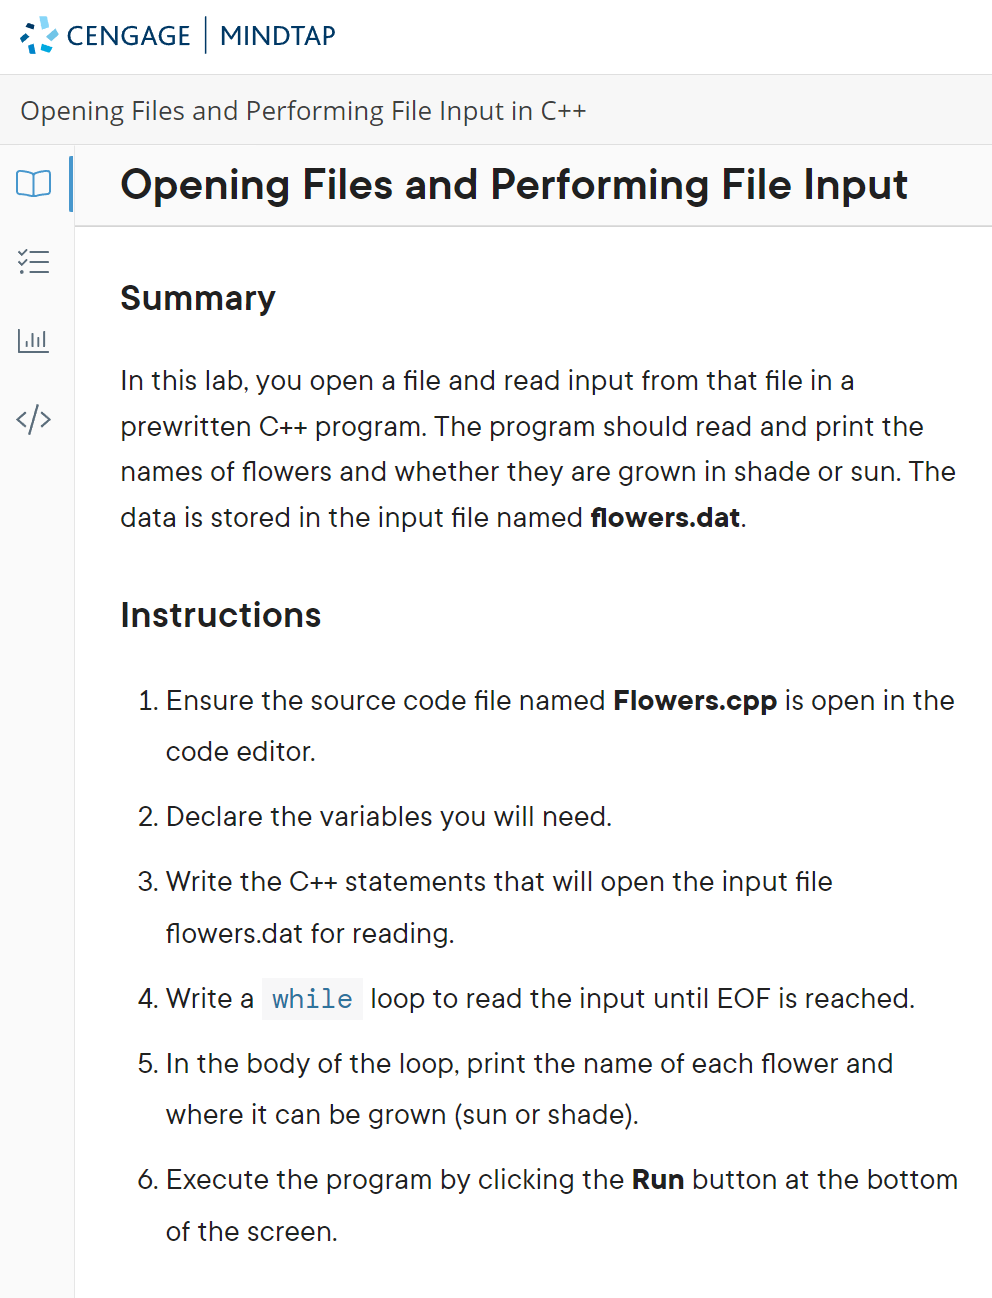 CENGAGE MINDTAP
Opening Files and Performing File Input in C++
|Opening Files and Performing File Input
Summary
In this lab, you open a file and read input from that file in a
prewritten C++ program. The program should read and print the
names of flowers and whether they are grown in shade or sun. The
data is stored in the input file named flowers.dat.
Instructions
1. Ensure the source code file named Flowers.cpp is open in the
code editor.
2. Declare the variables you will need.
3. Write the C++ statements that will open the input file
flowers.dat for reading.
4. Write a while loop to read the input until EOF is reached.
5. In the body of the loop, print the name of each flower and
where it can be grown (sun or shade).
6. Execute the program by clicking the Run button at the bottom
of the screen.
